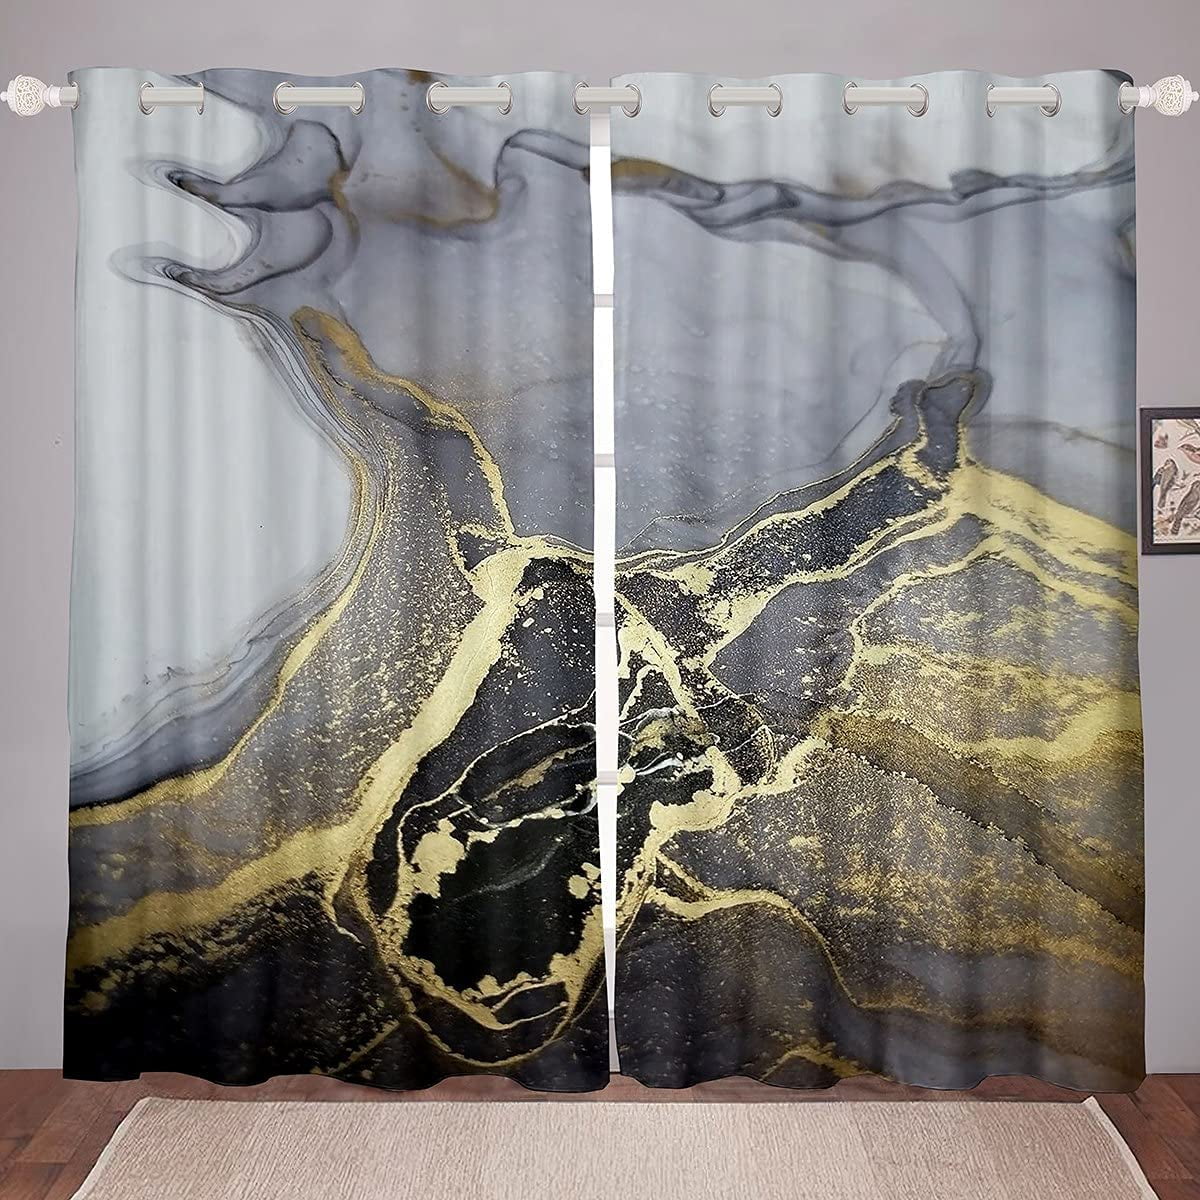 Chic Marble Window Curtains For Bedroom Living Room Gold Grey Marble Curtains For Kids Boys Girls Abstract Art Decor Window Drapes Venetian Style Window Treatments 38 X 54 Inches 2 Panels Walmart Canada